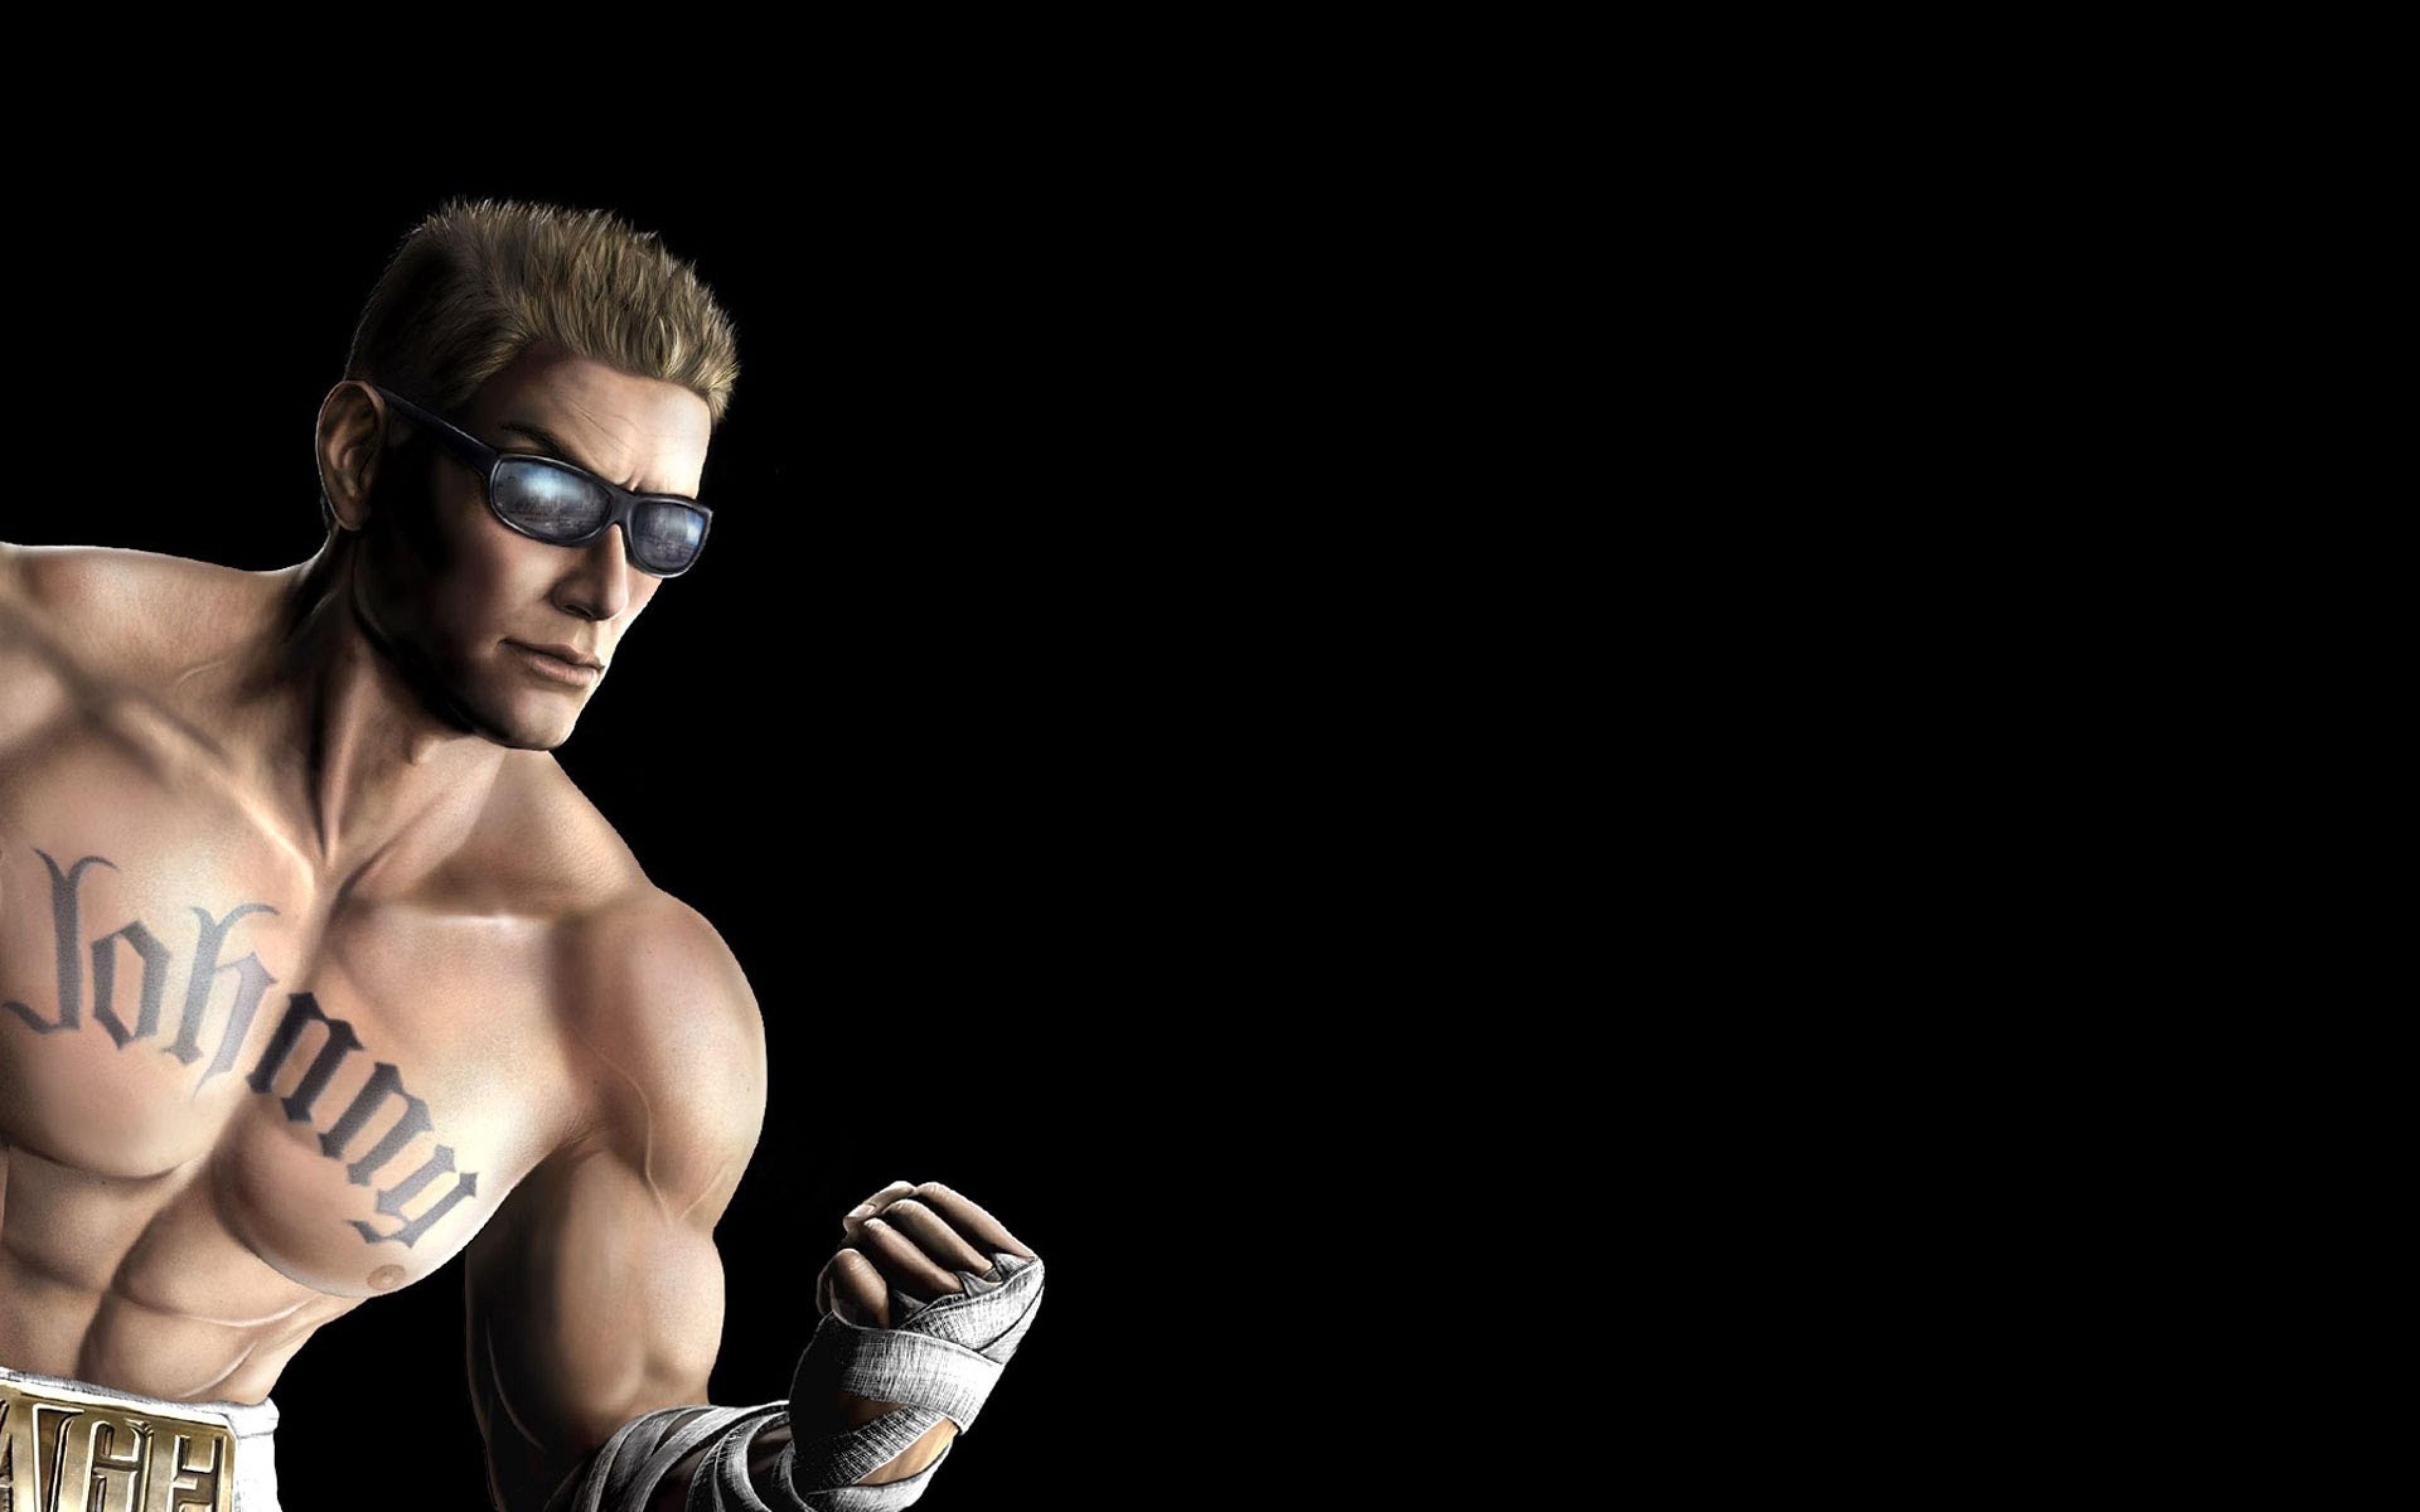 Download Wallpaper 3840x2400 Johnny cage, Mortal kombat, Earthly